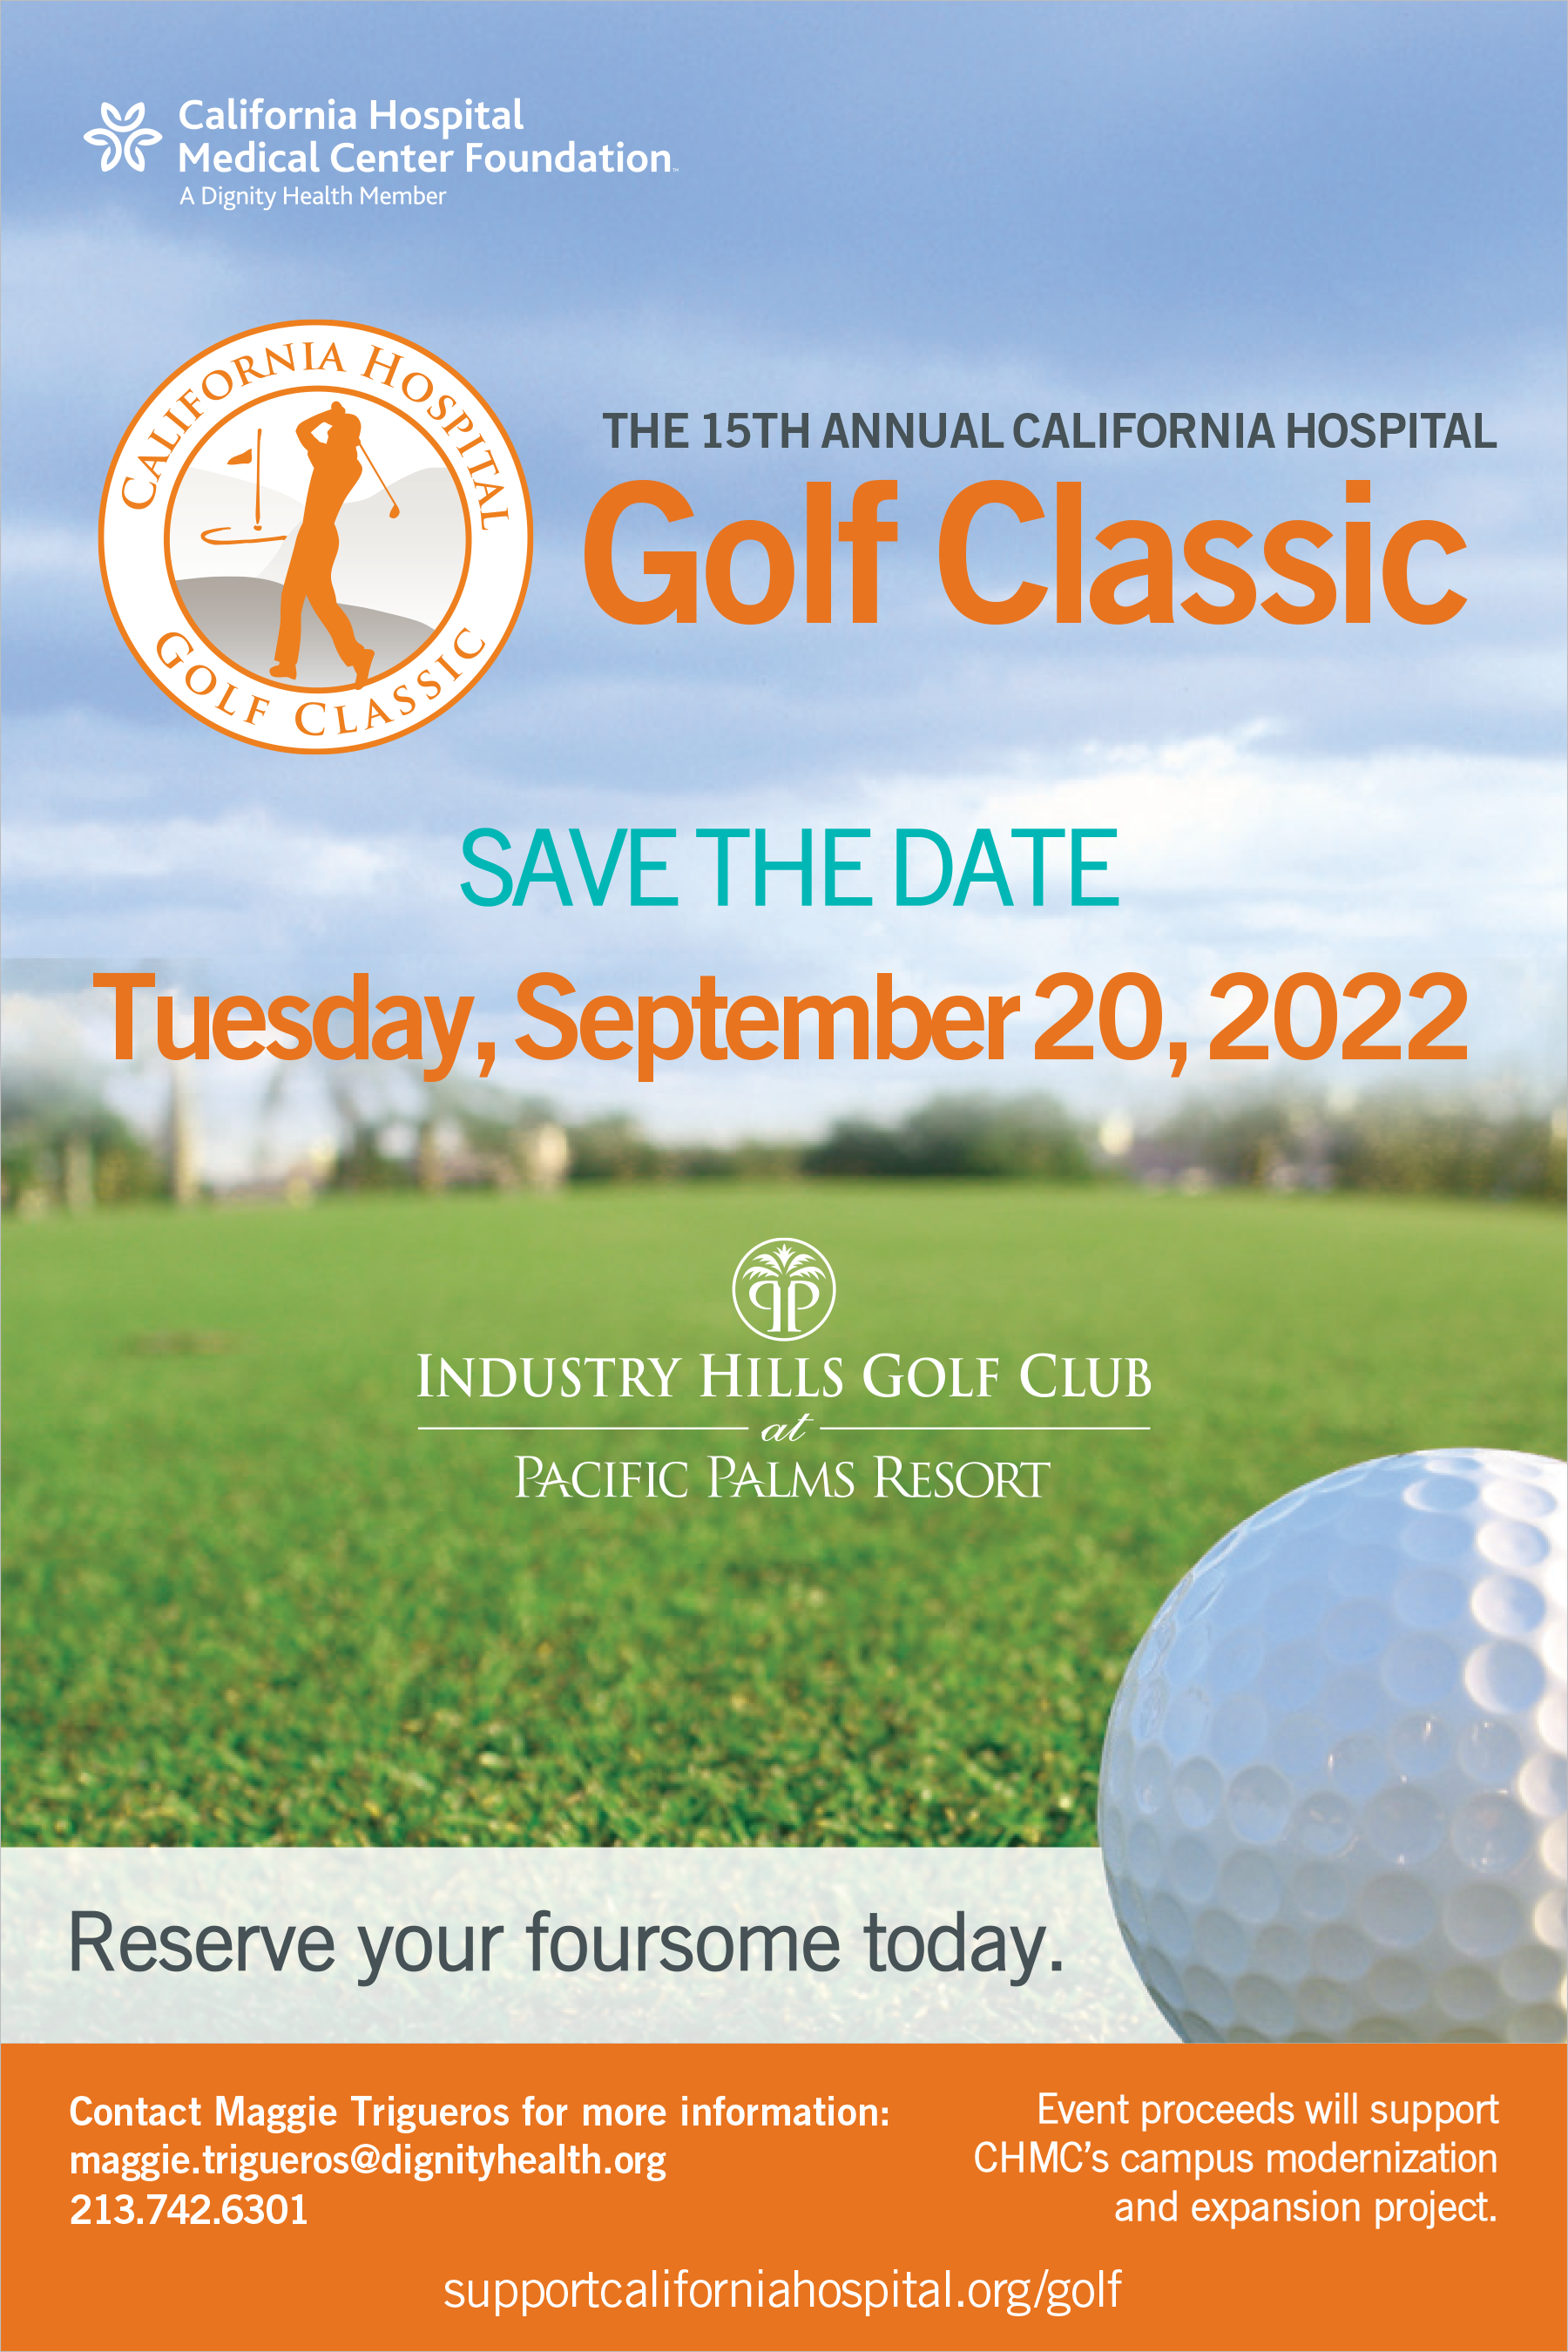 Save the Date poster for 15th Annual California Hospital Golf Classic